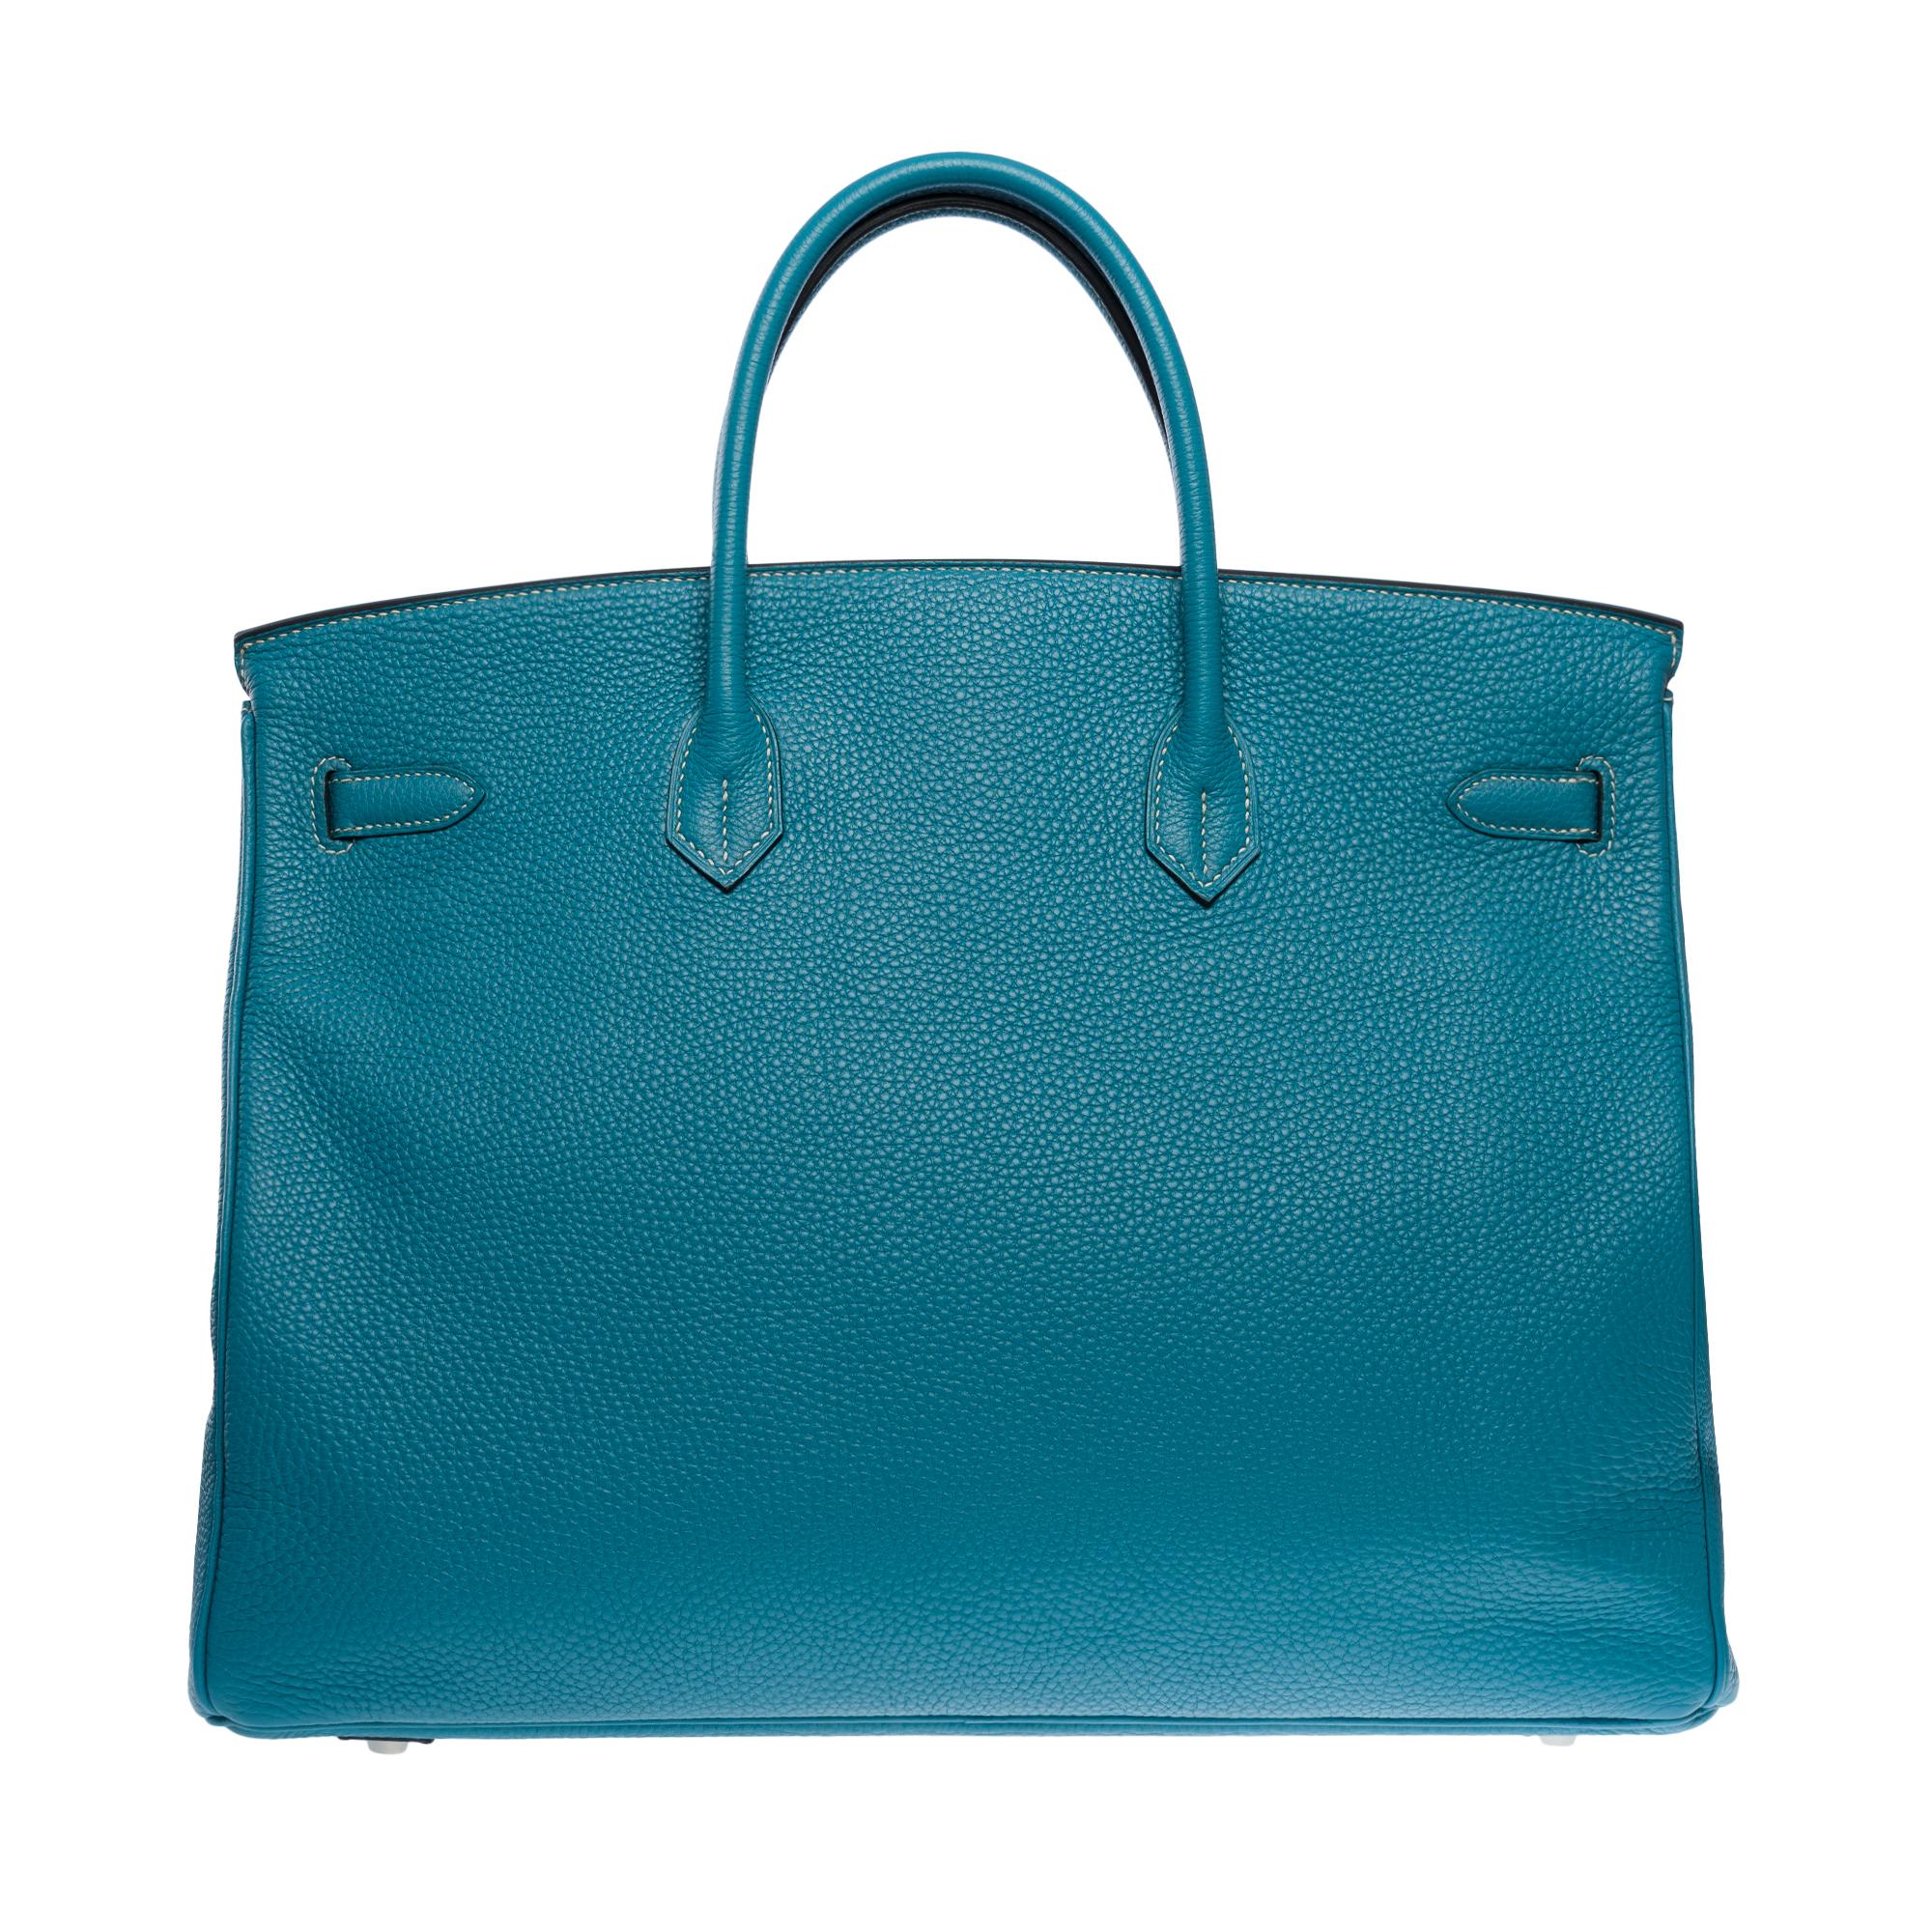 Stunning Hermes Birkin 40 handbag in Blue Jean Togo leather ,   palladium silver metal hardware, double handle in blue leather for a hand carry

Flap closure
Inner lining in blue leather, one zipped pocket, one patch pocket
Signature : 